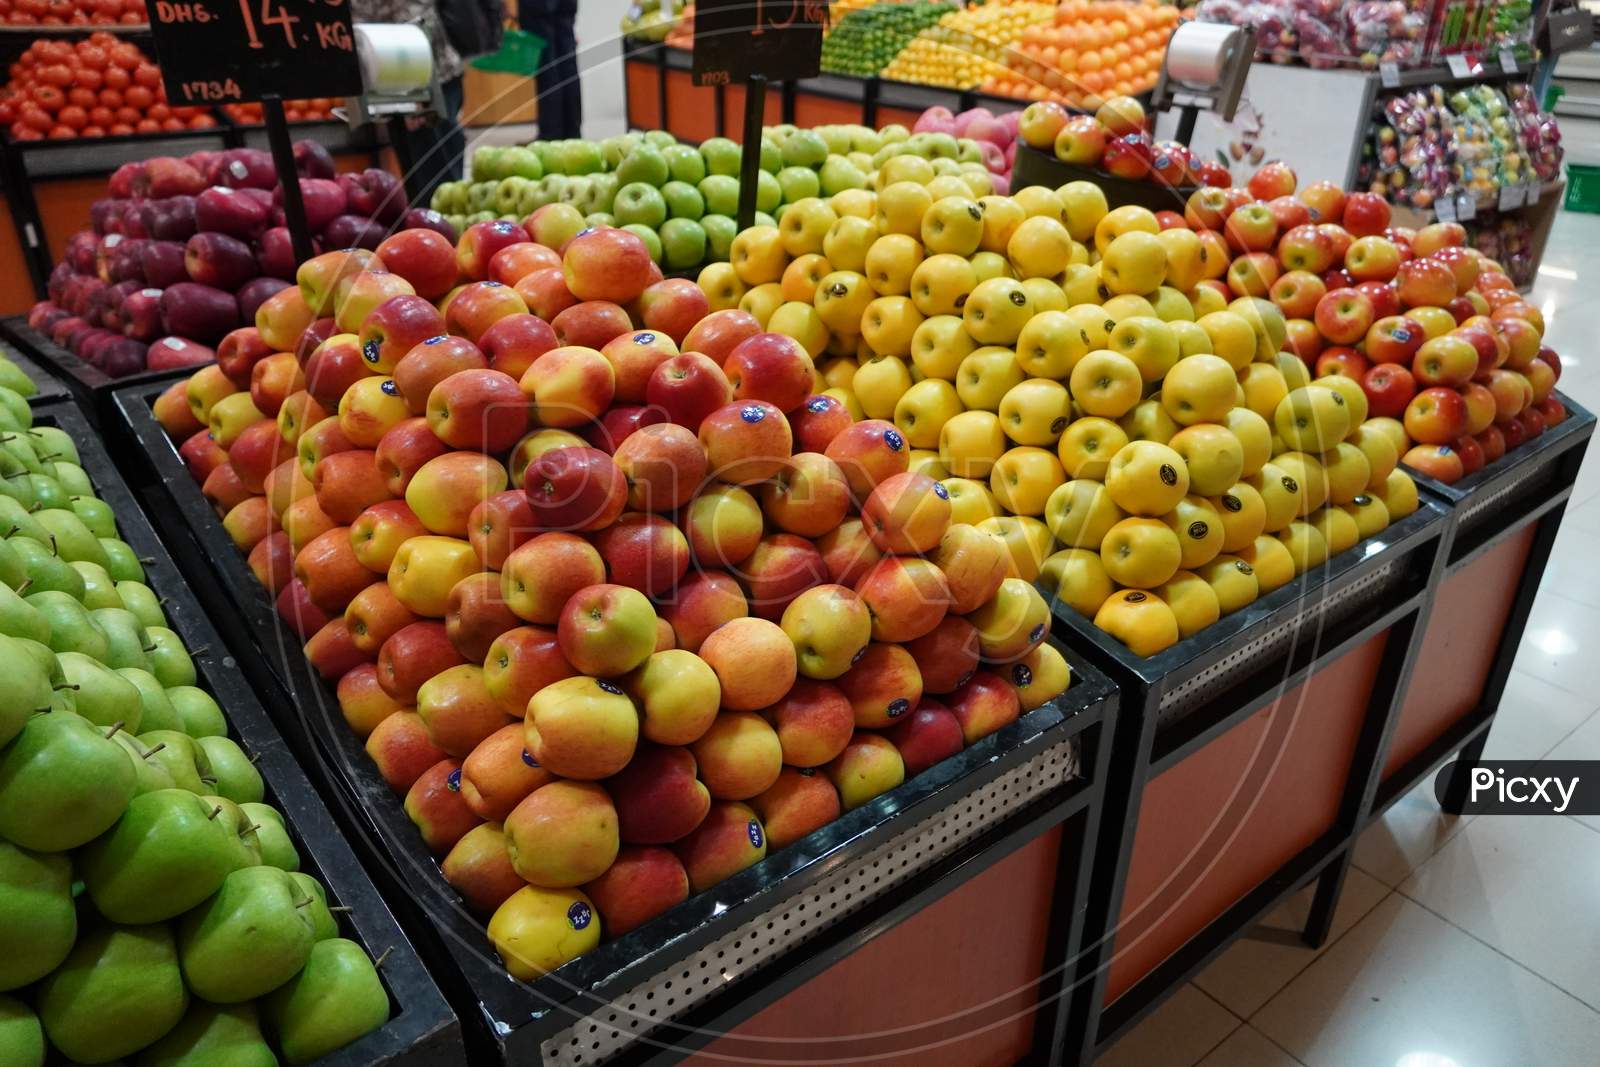 Bunch Of Red, Yellow And Green Apples On Boxes In Supermarket. Apples Being Sold At Public Market. Organic Food Fresh Apples In Shop, Store - Dubai Uae December 2019